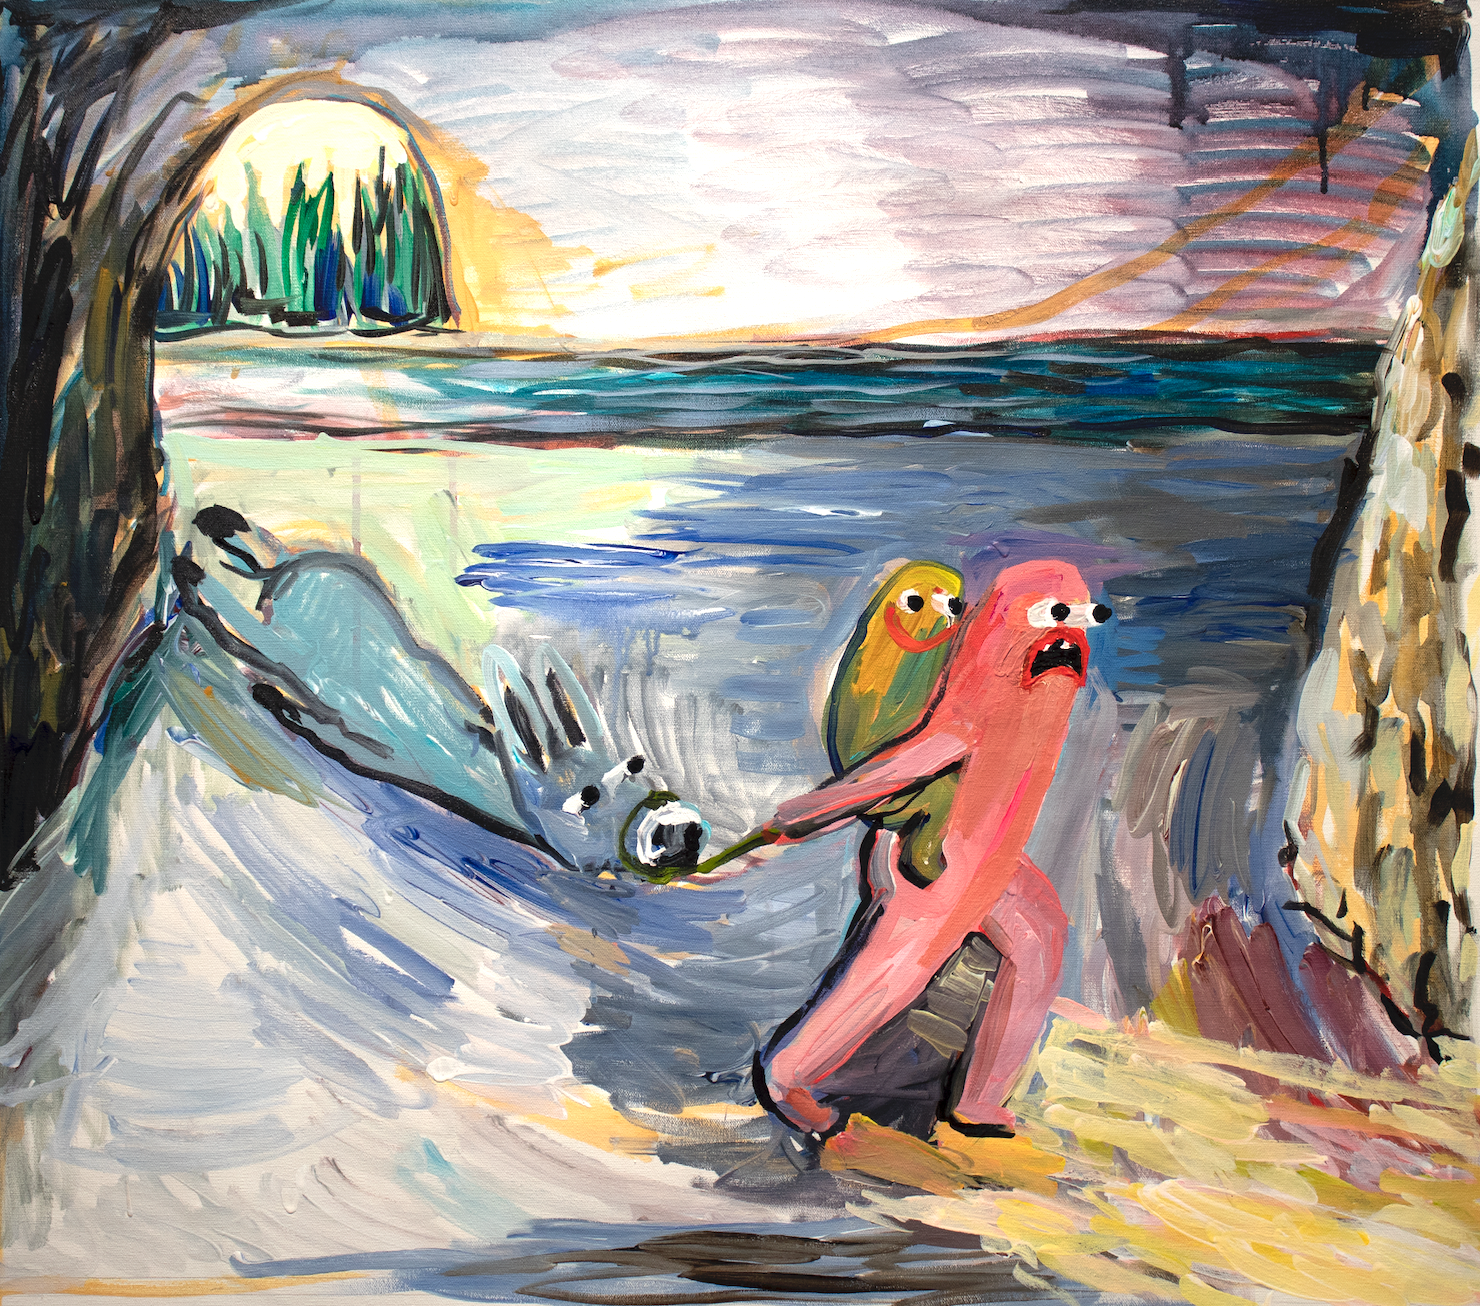 Acrylic on canvas depicts abstract pink humanoid carrying smaller yellow humanoid on back and dragging gray donkey by the nose; in the distance, as if through mouth of a cave, pine trees are visible